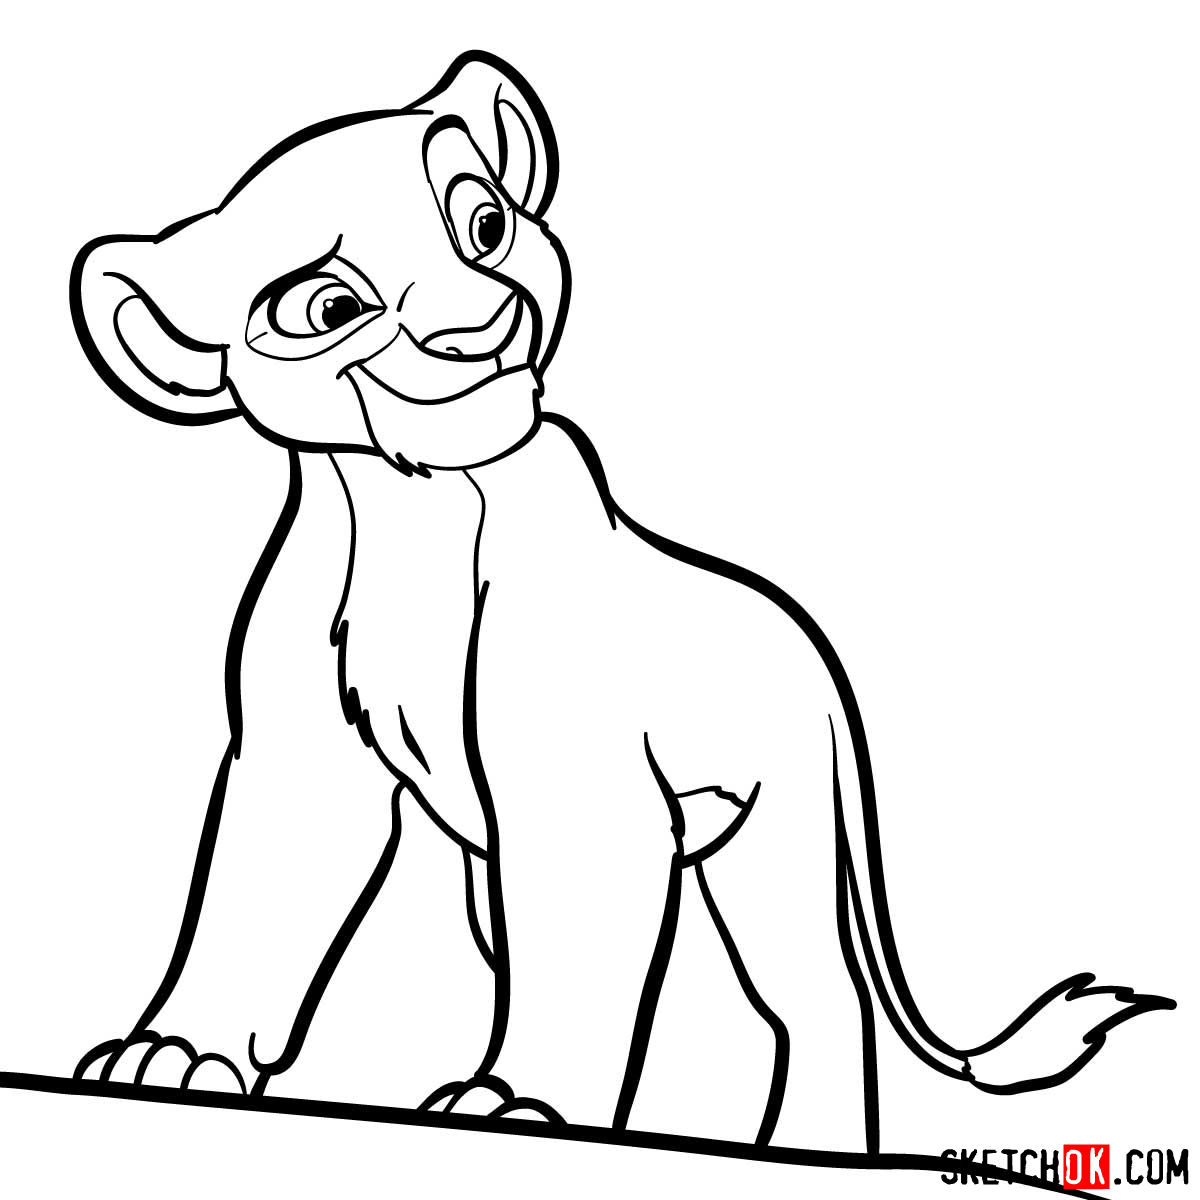 How to draw Kiara | The Lion King - Sketchok easy drawing guides